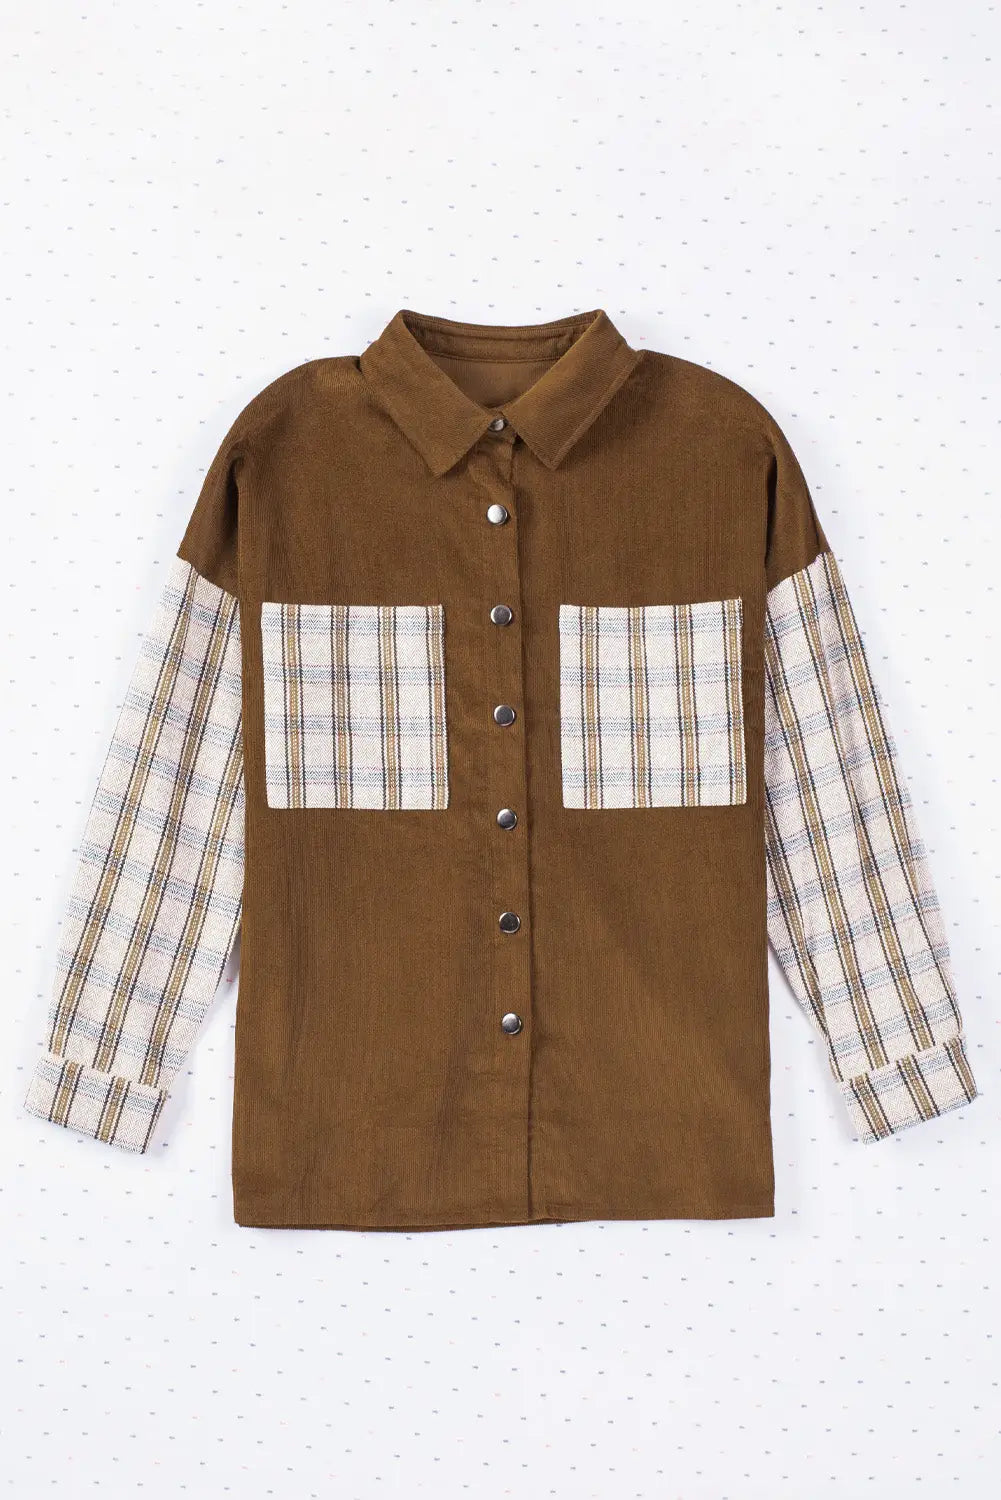 Brown plaid patchwork corduroy shirt jacket with pocket - jackets